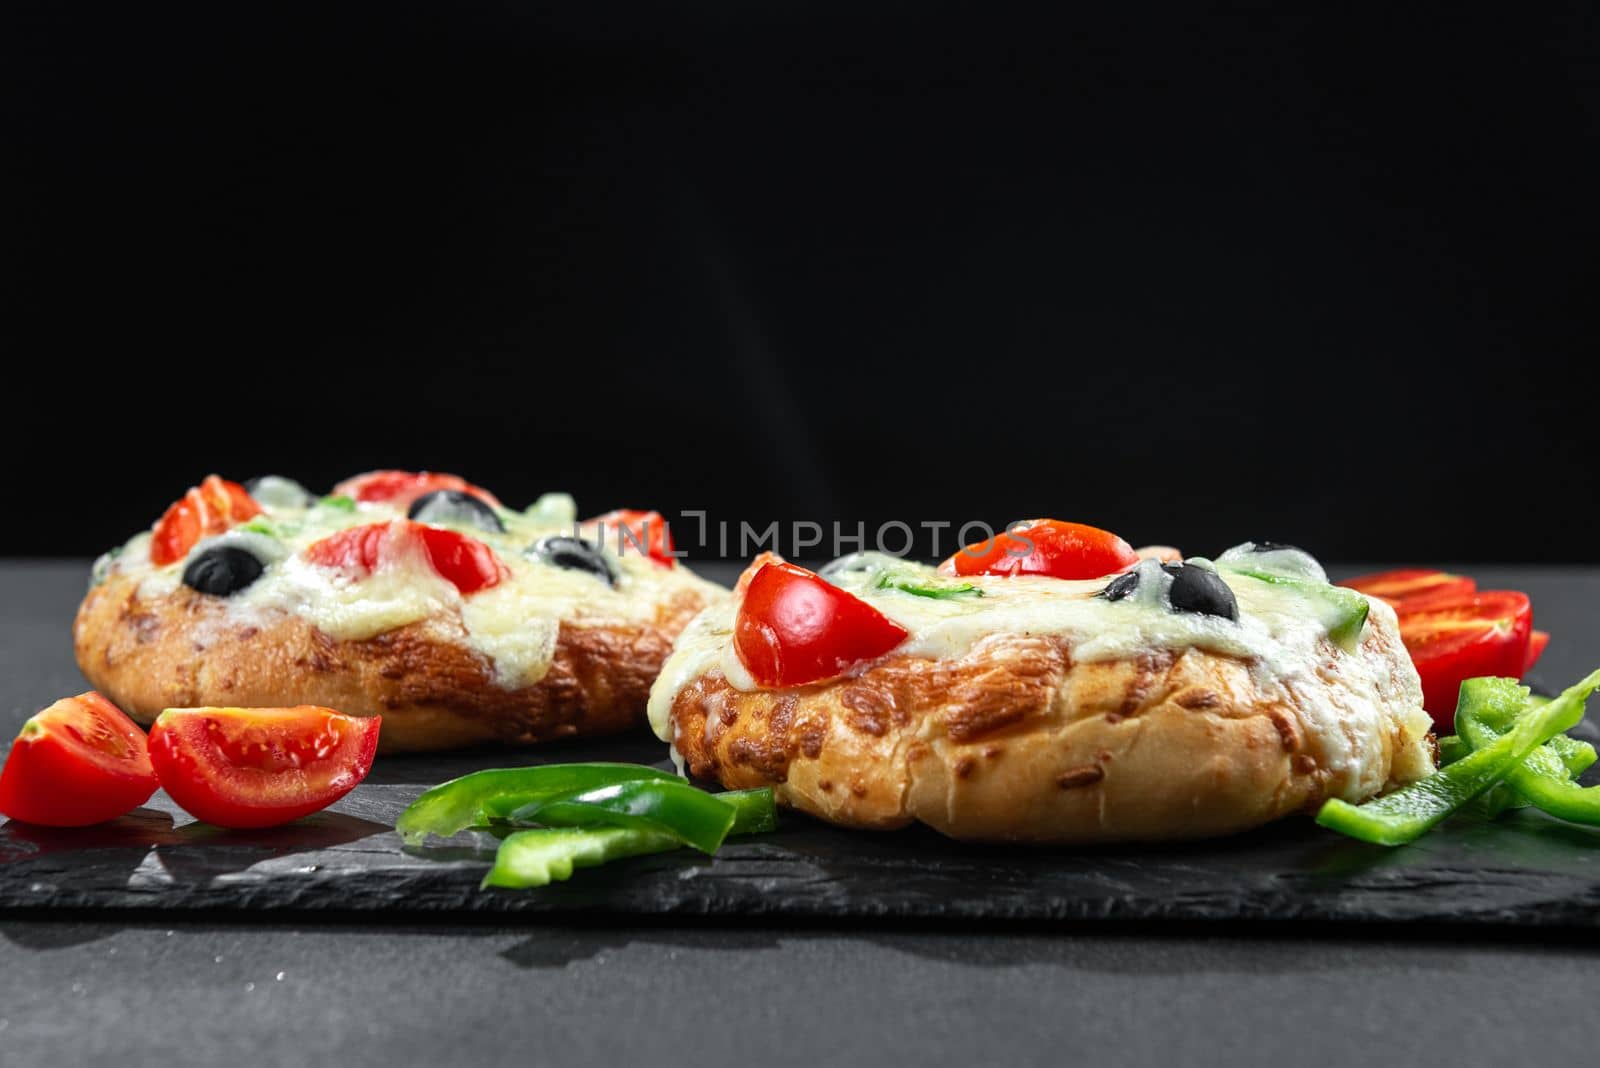 Homemade pizza with vegetables for breakfast on black background with blank space for text.